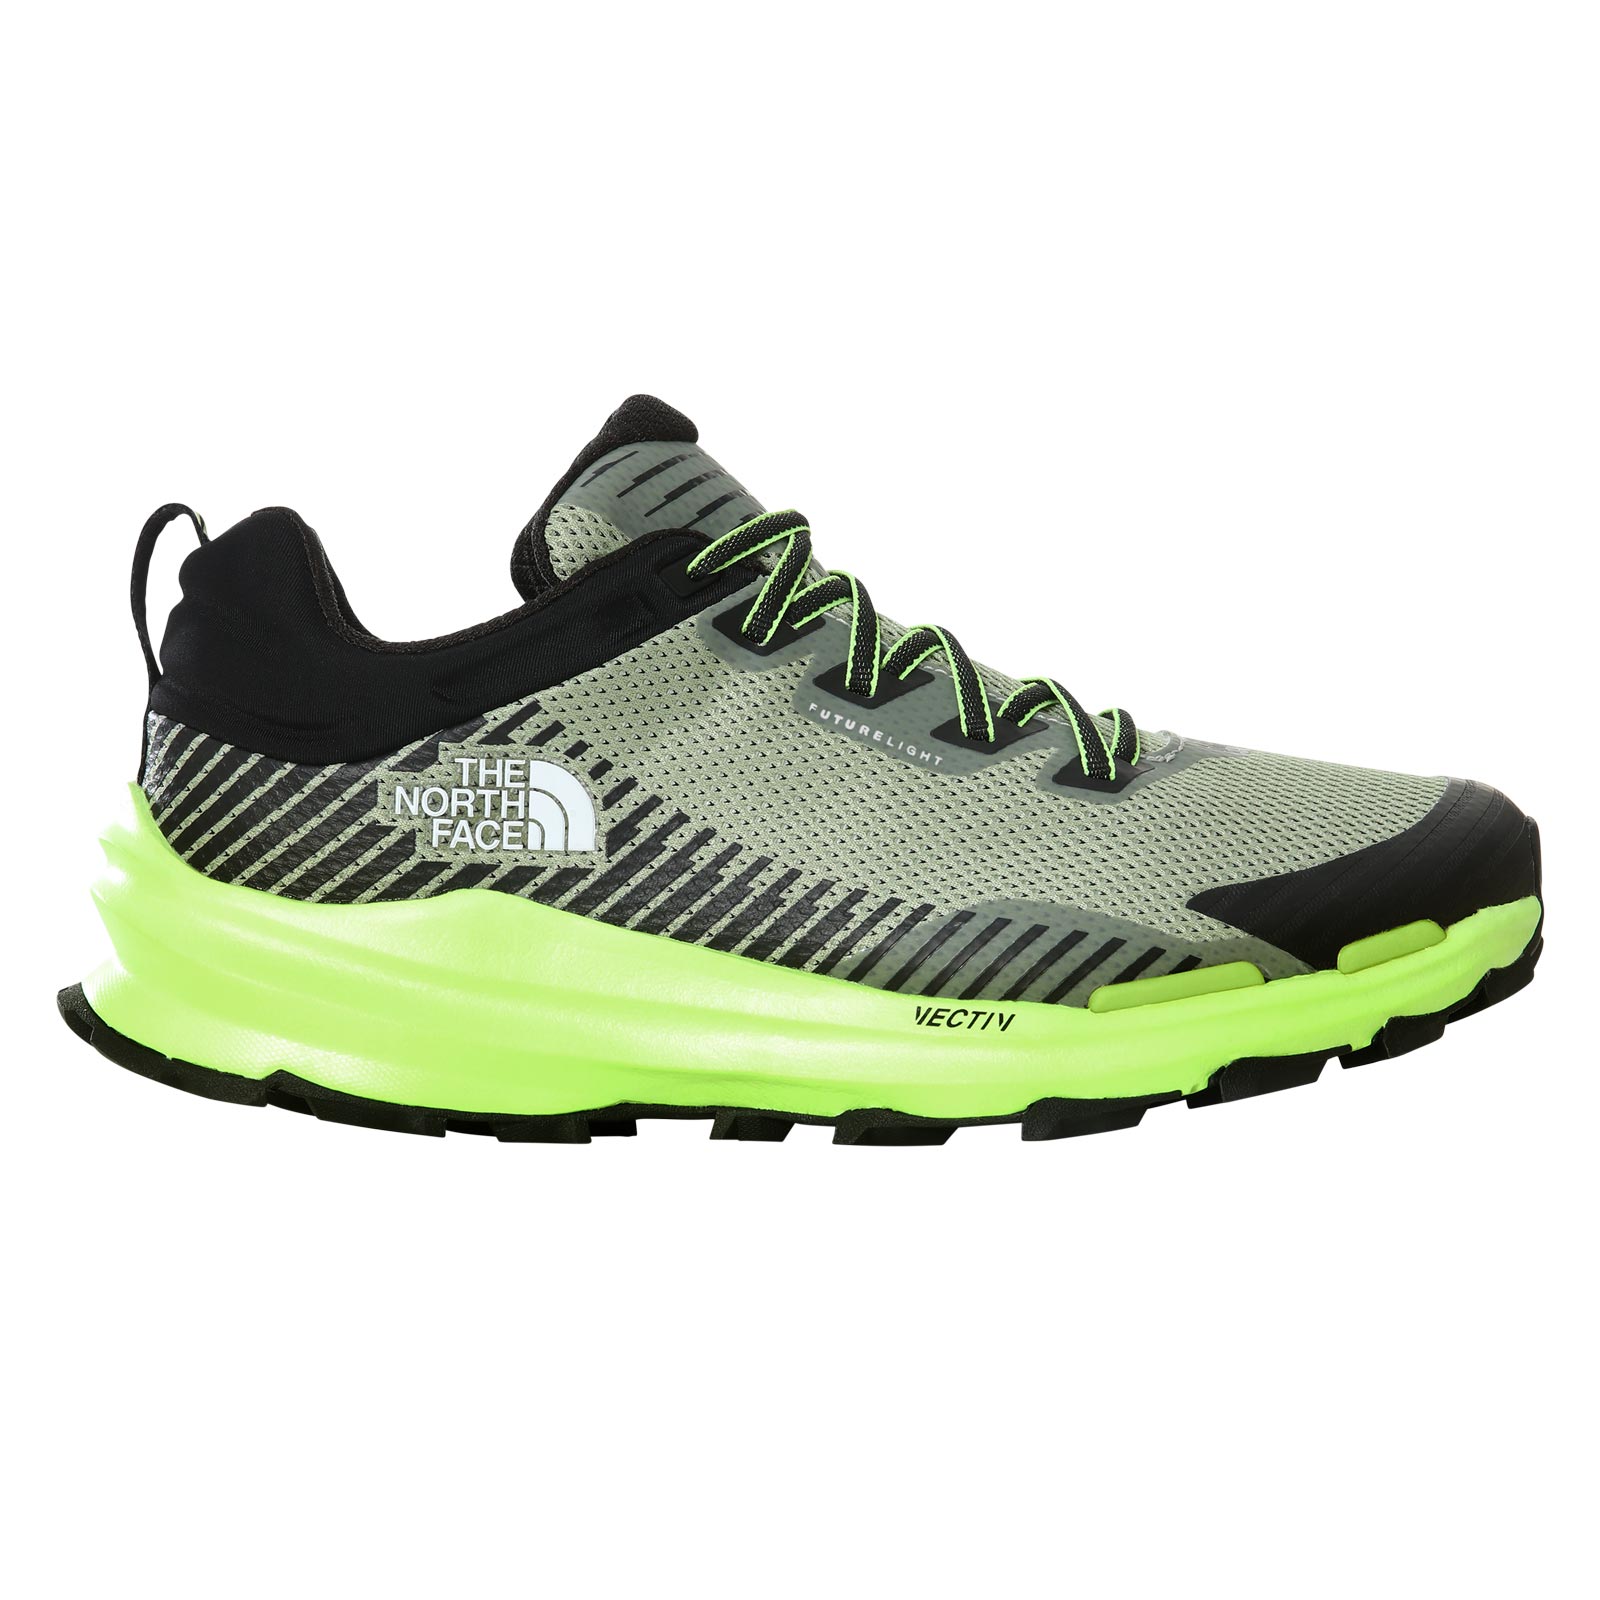 THE NORTH FACE VECTIV™ FASTPACK FUTURELIGHT™ MENS HIKING SHOES